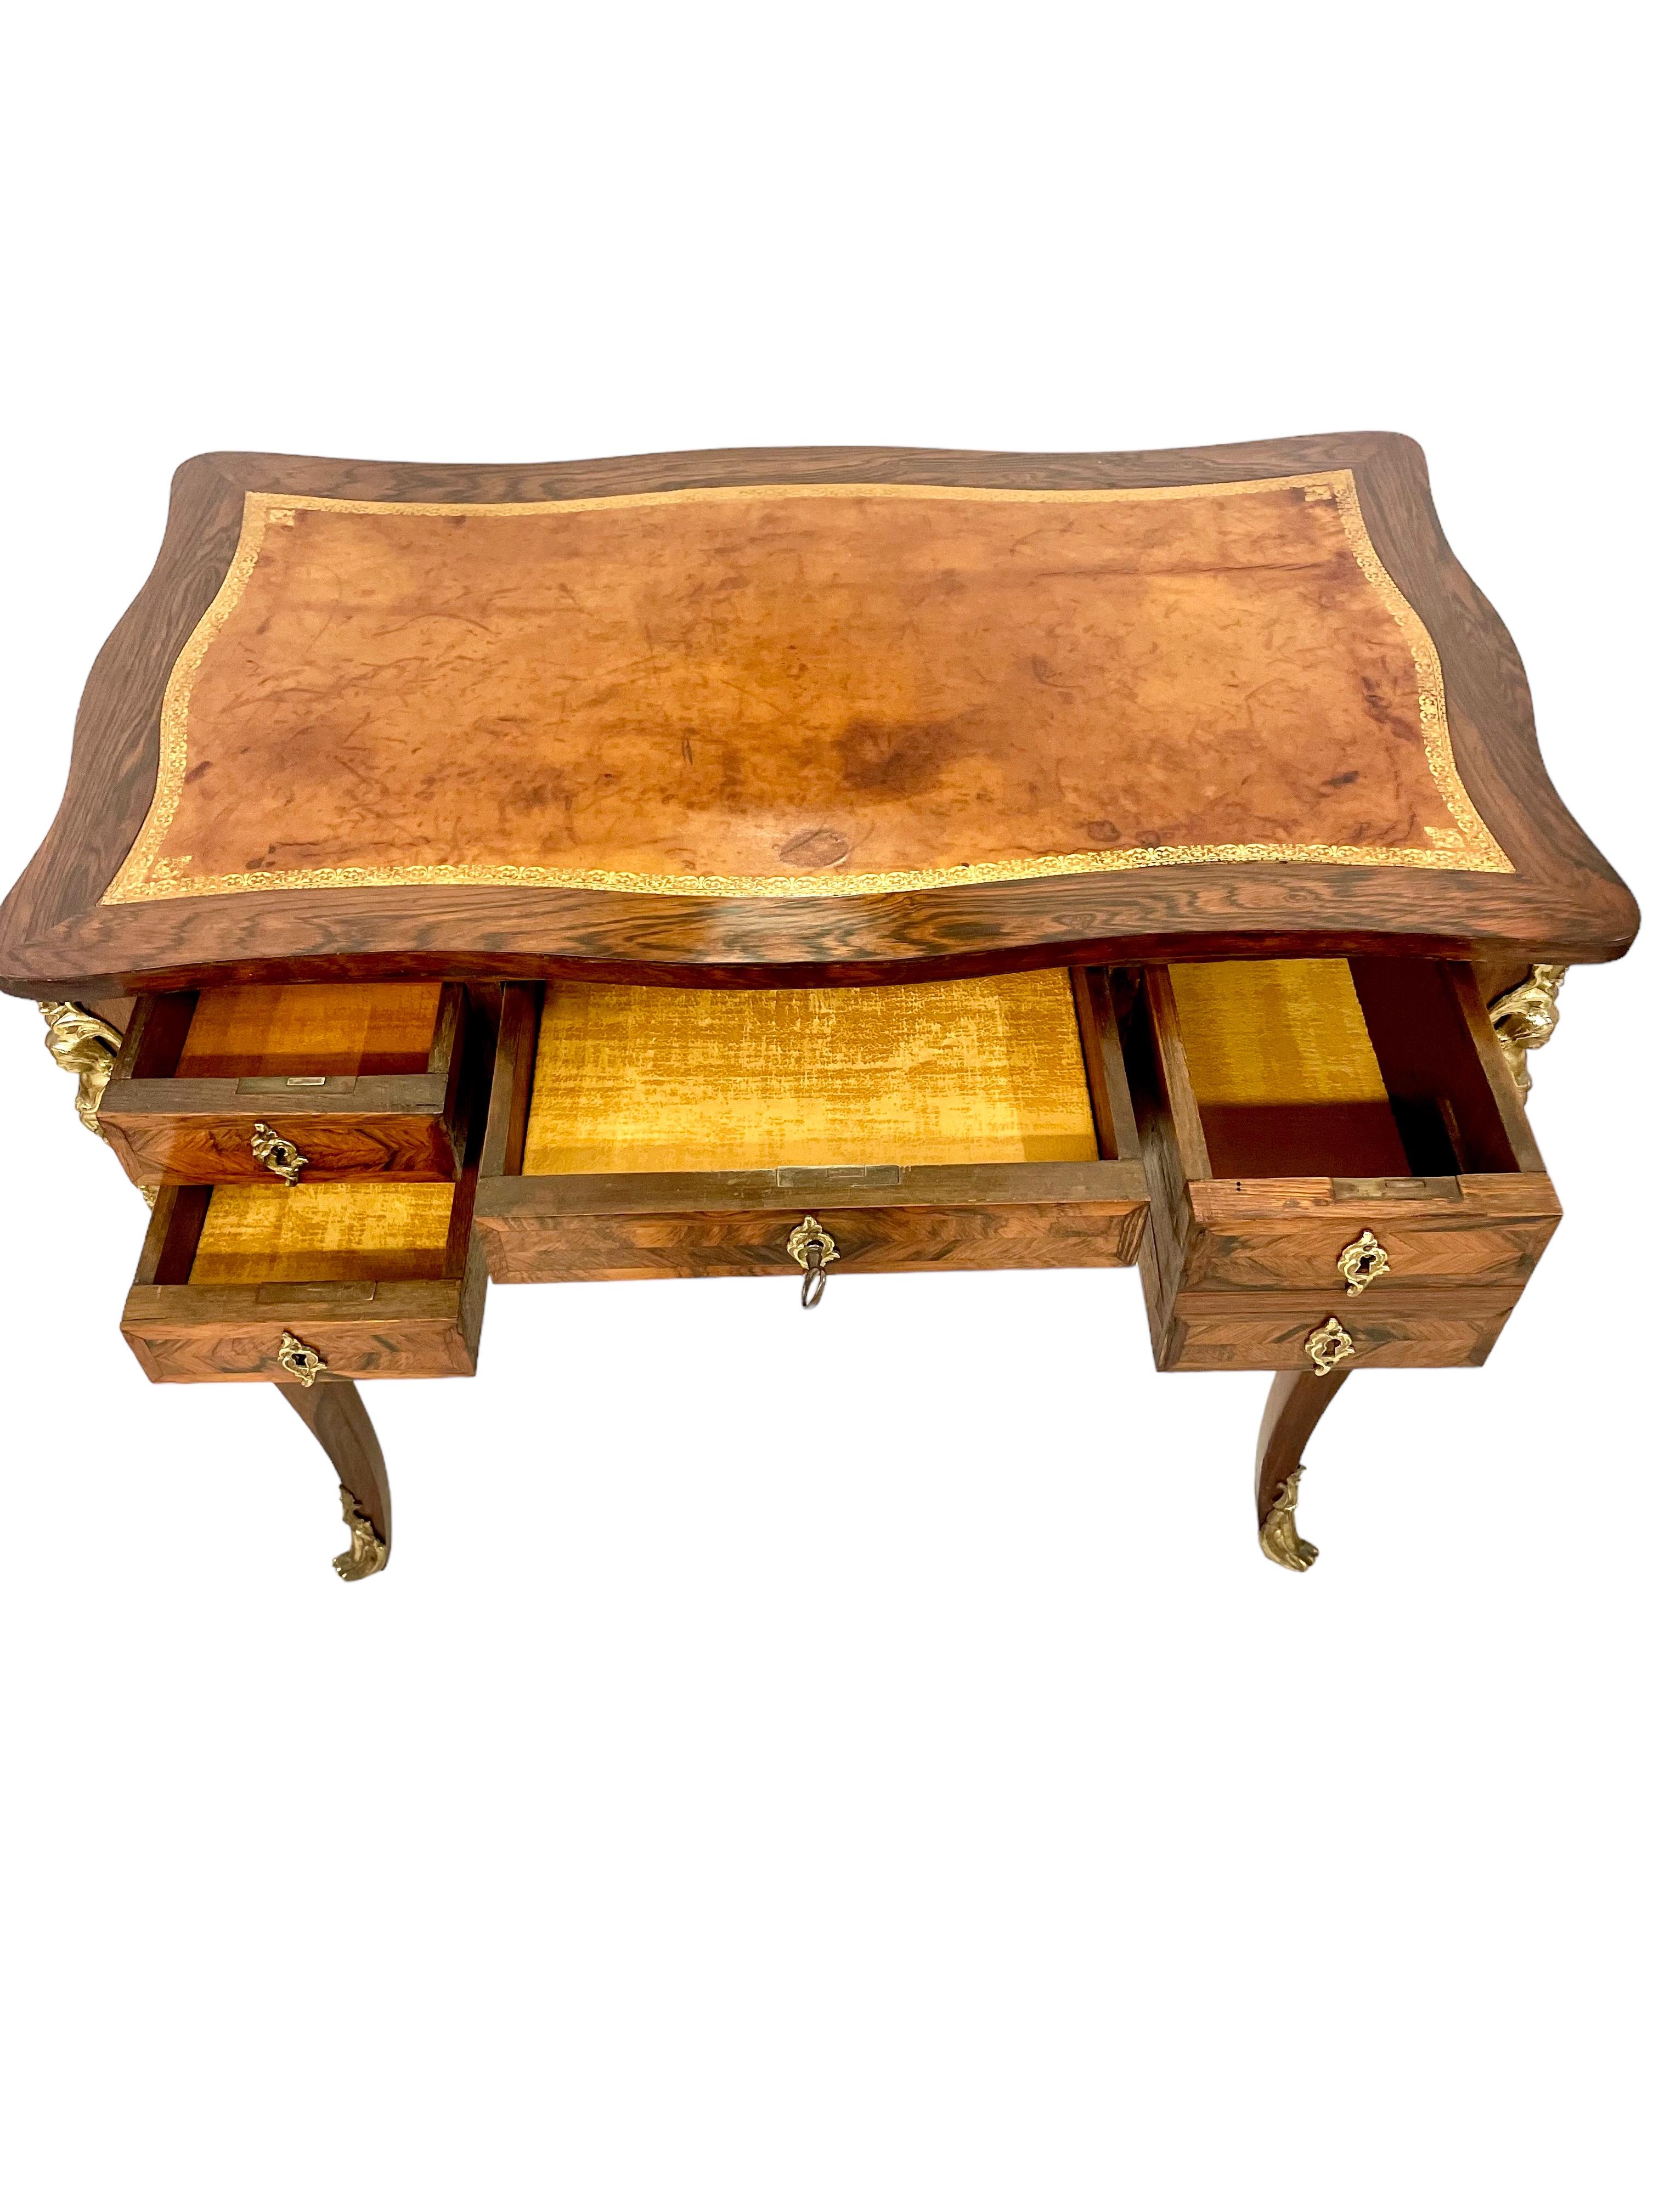 1750s Gilt Bronze Mounted Writing Lady Desk, by Adrien DELORME For Sale 3